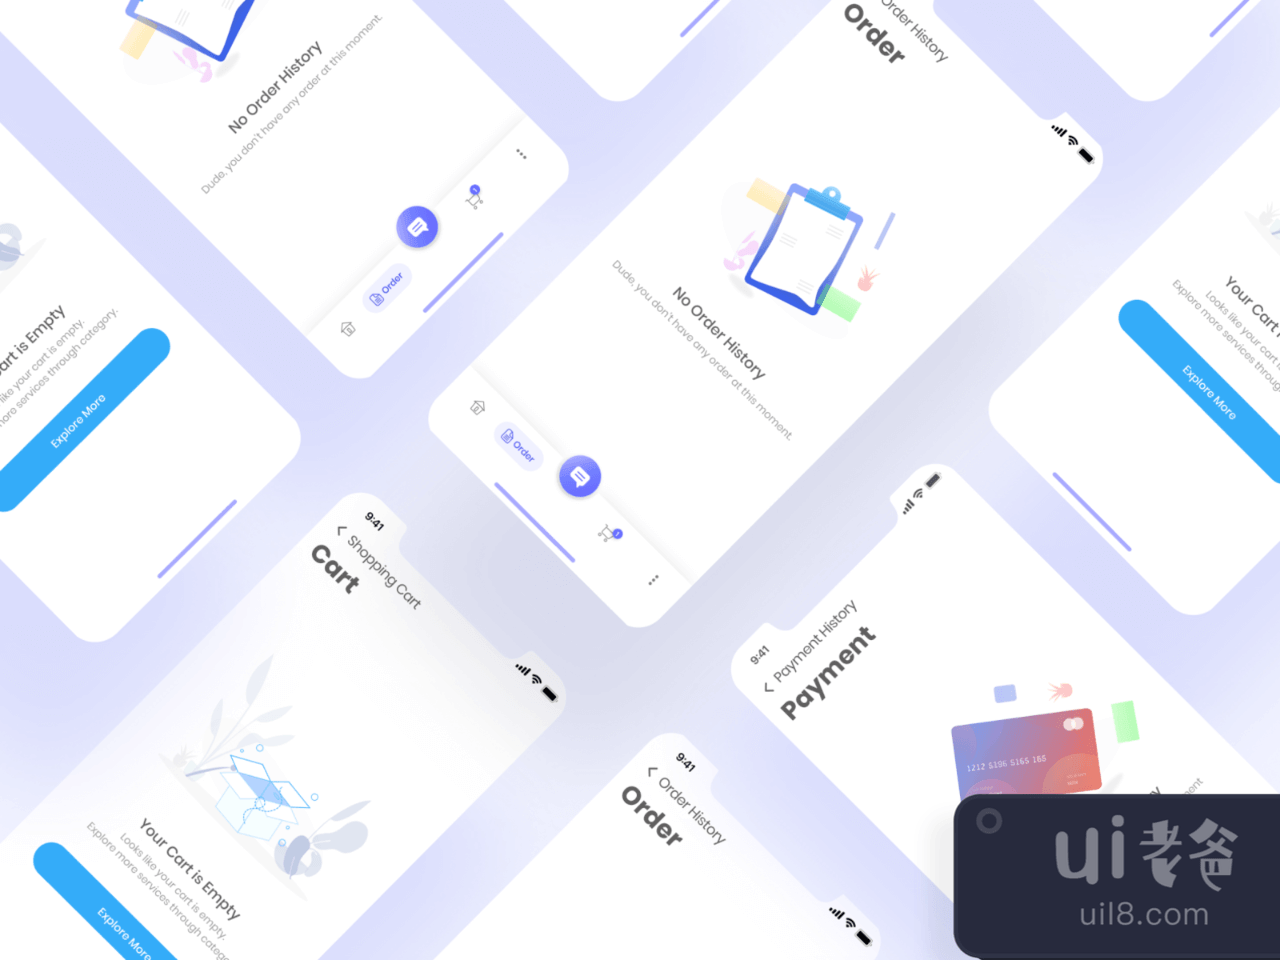 Empty App Screens Illustrations for Figma and Adobe XD No 1